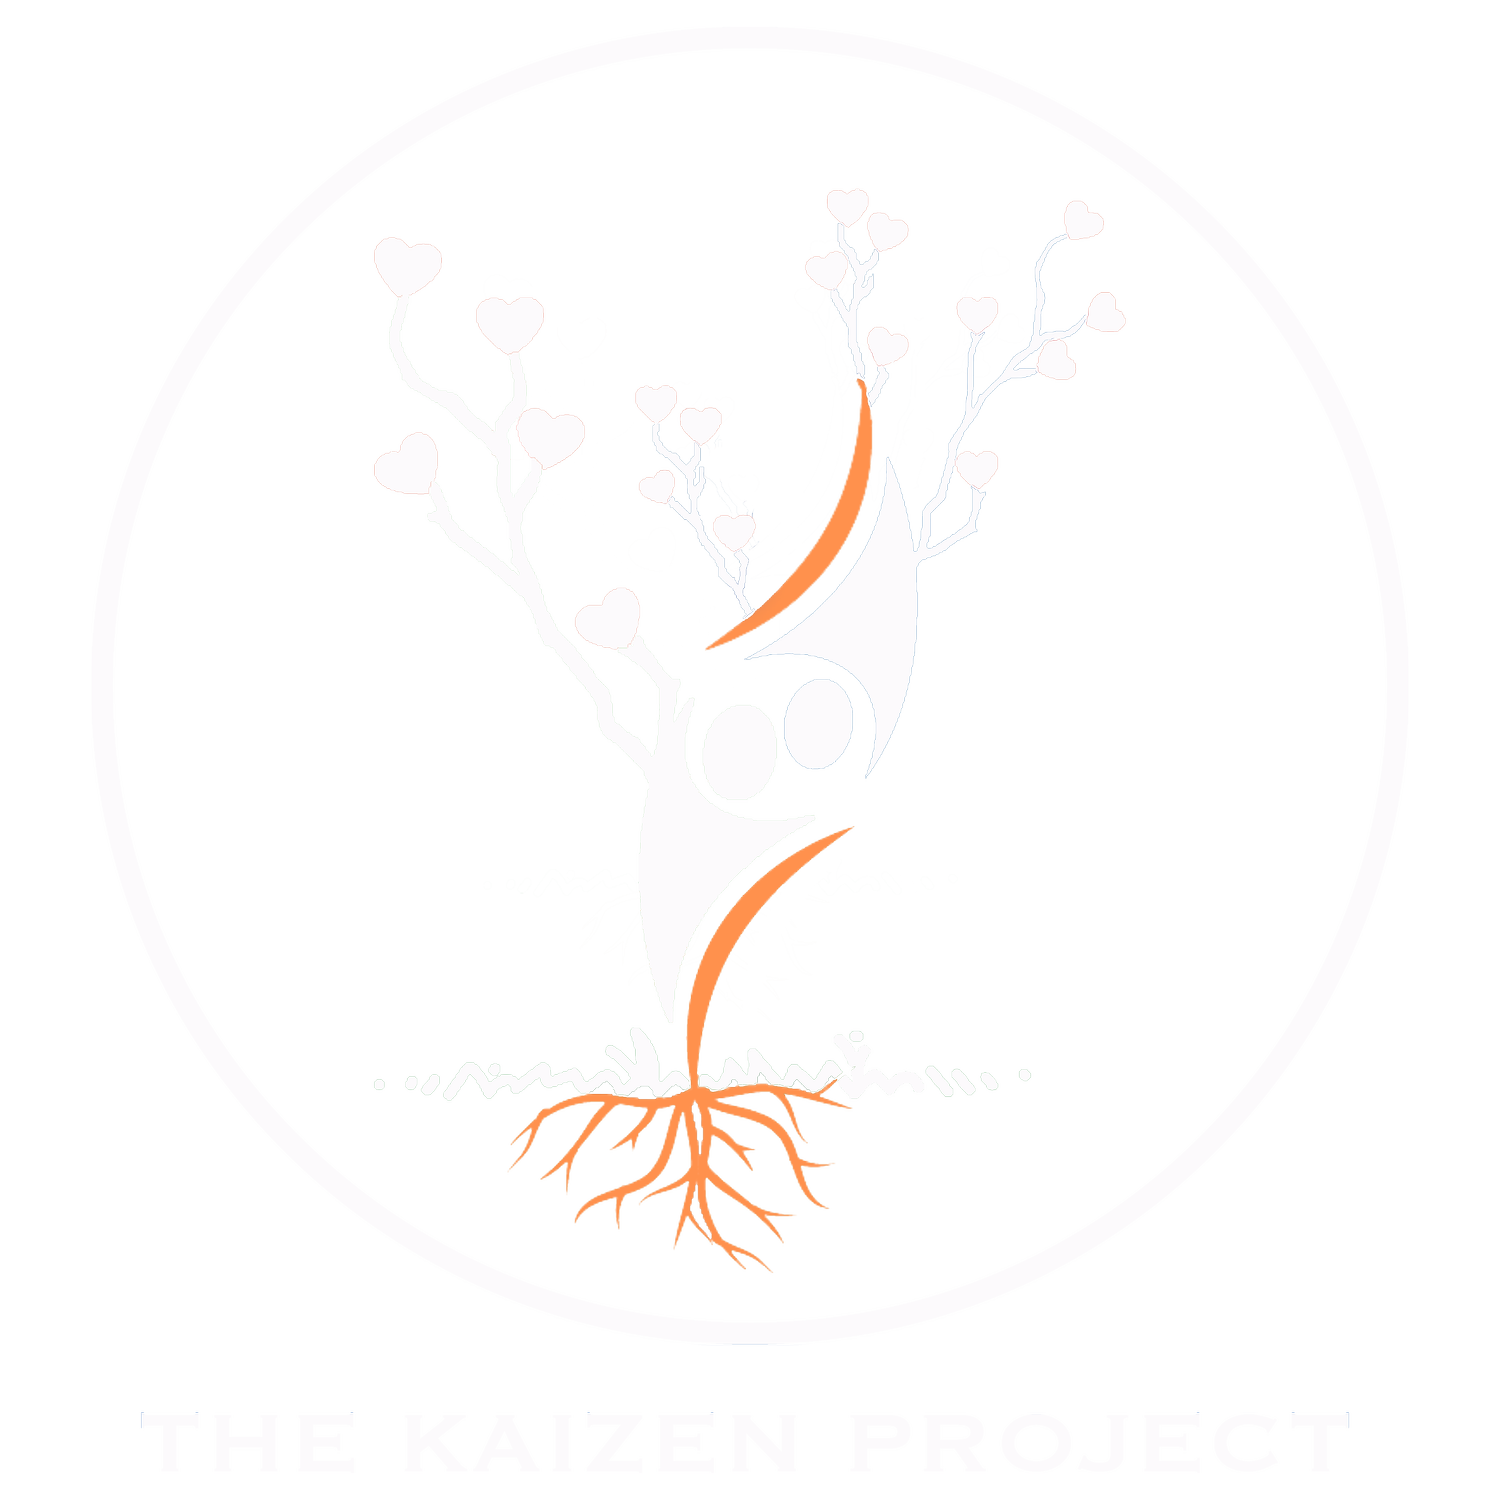 The Kaizen Project